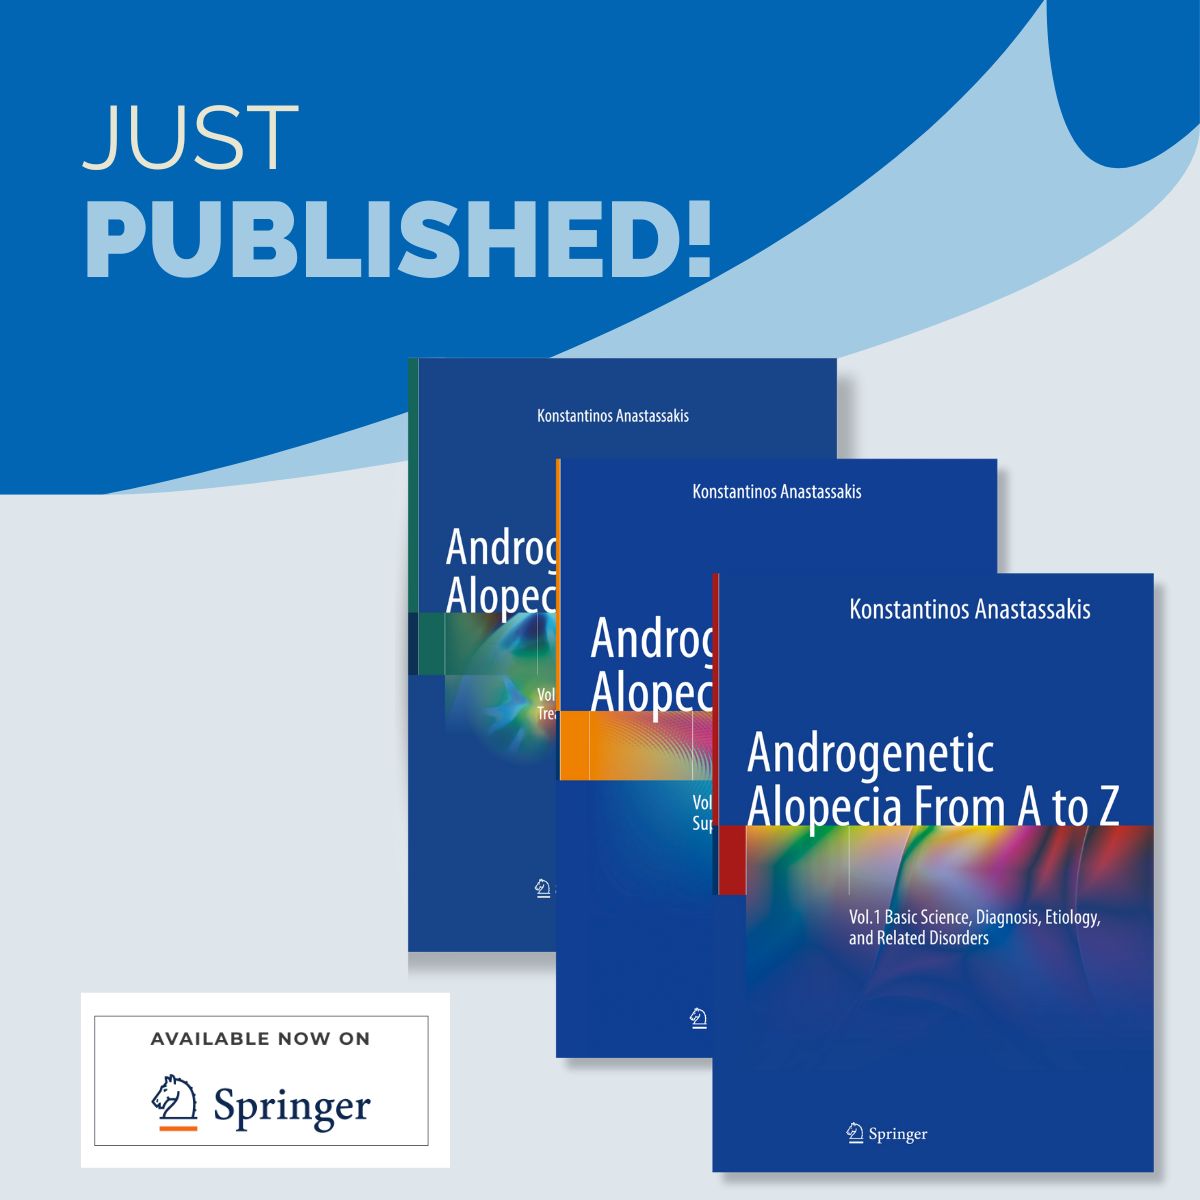 Androgenetic alopecia from a to z by springer